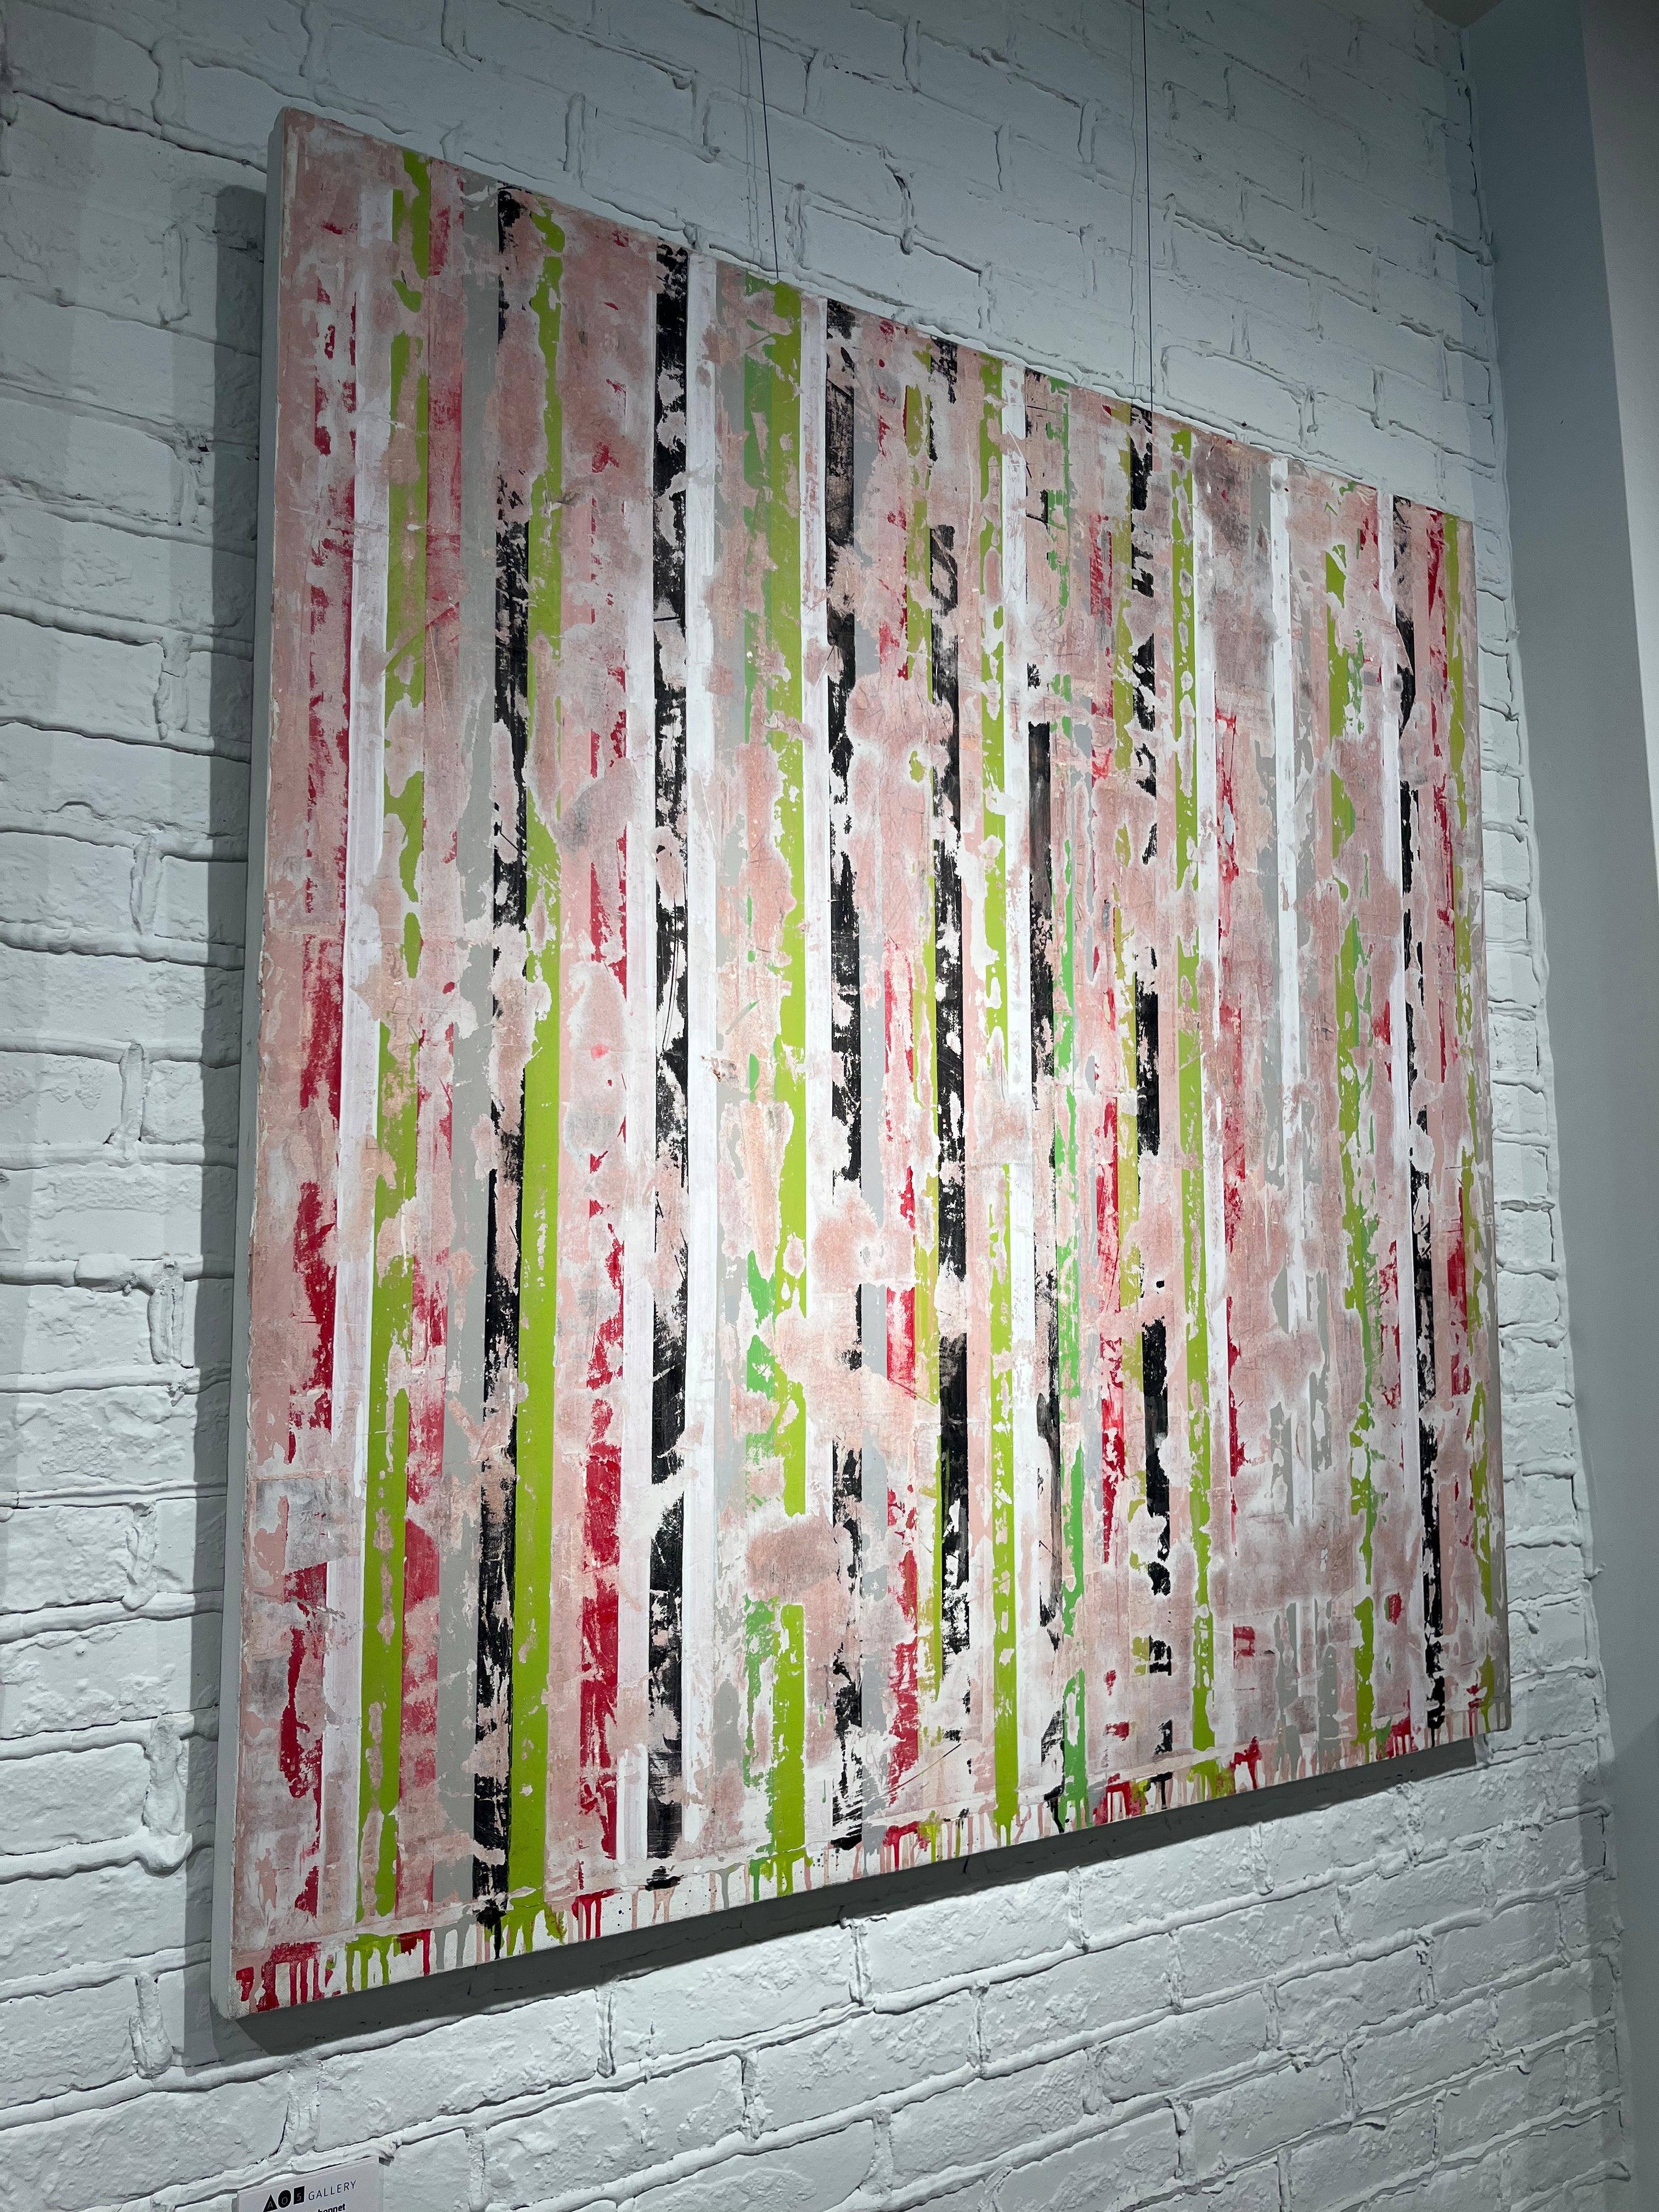 Nicole Charbonnet oversized original abstract artwork that is pink, green, black and red.